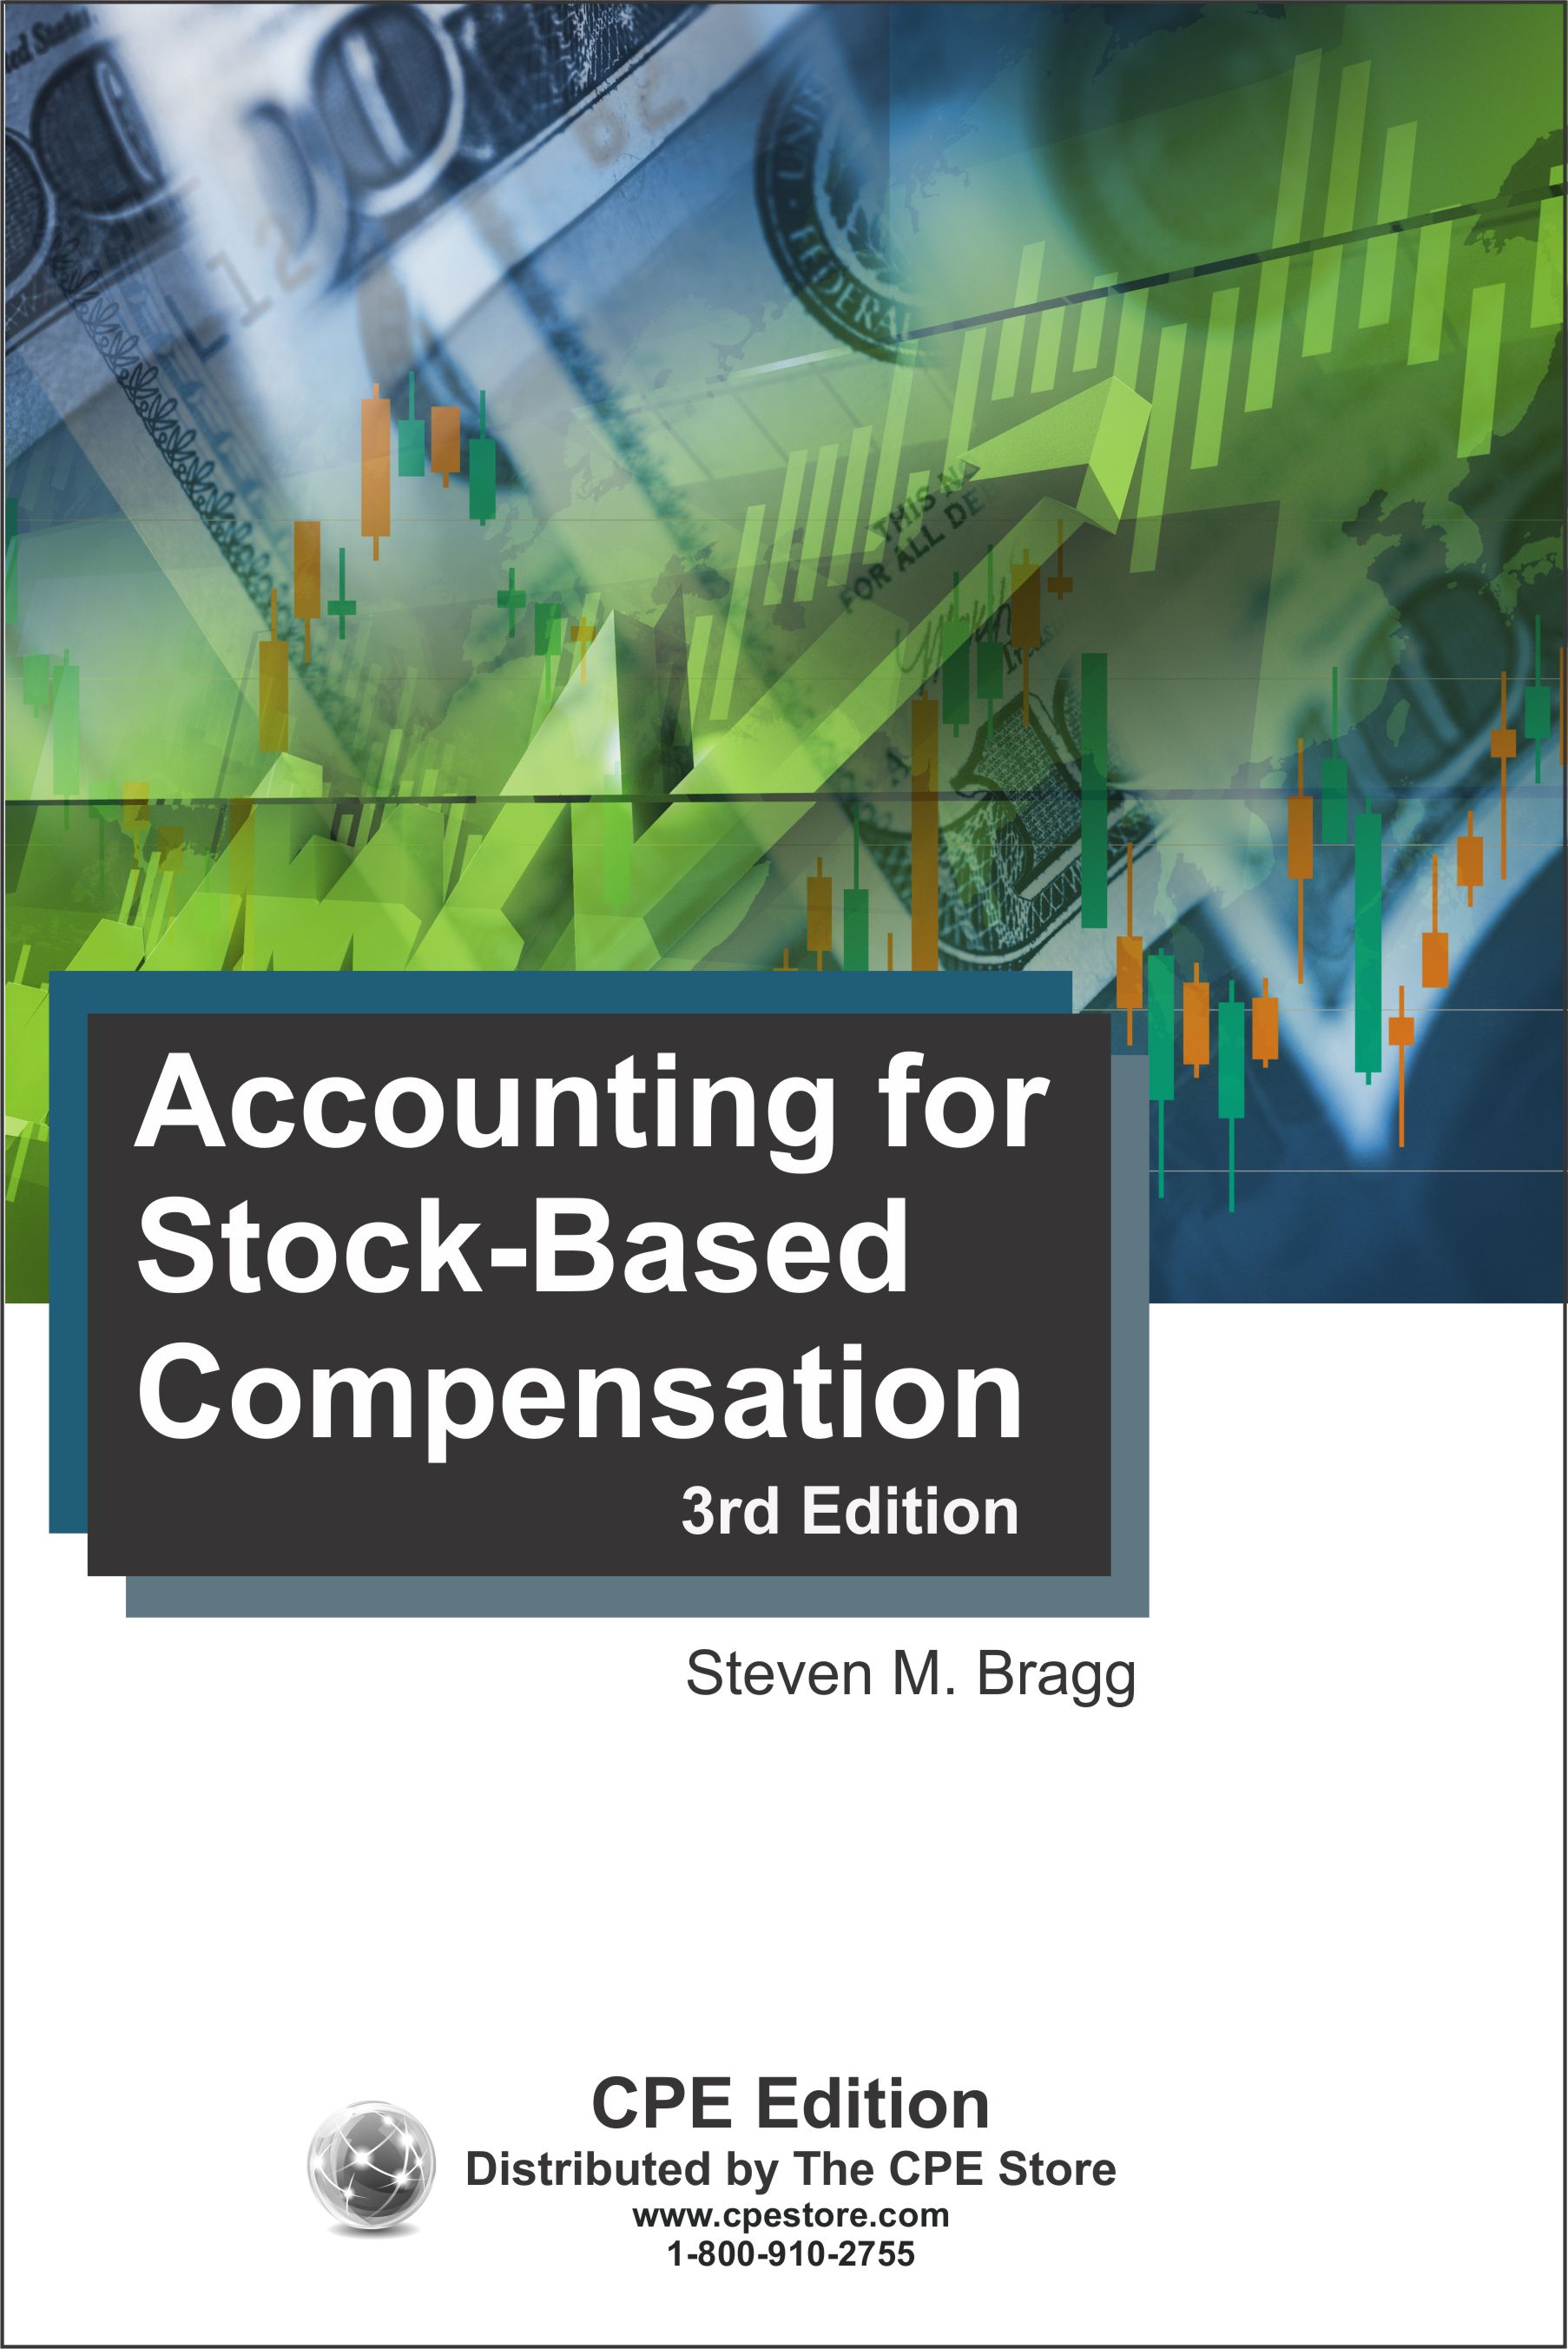 Accounting for Stock-Based Compensation